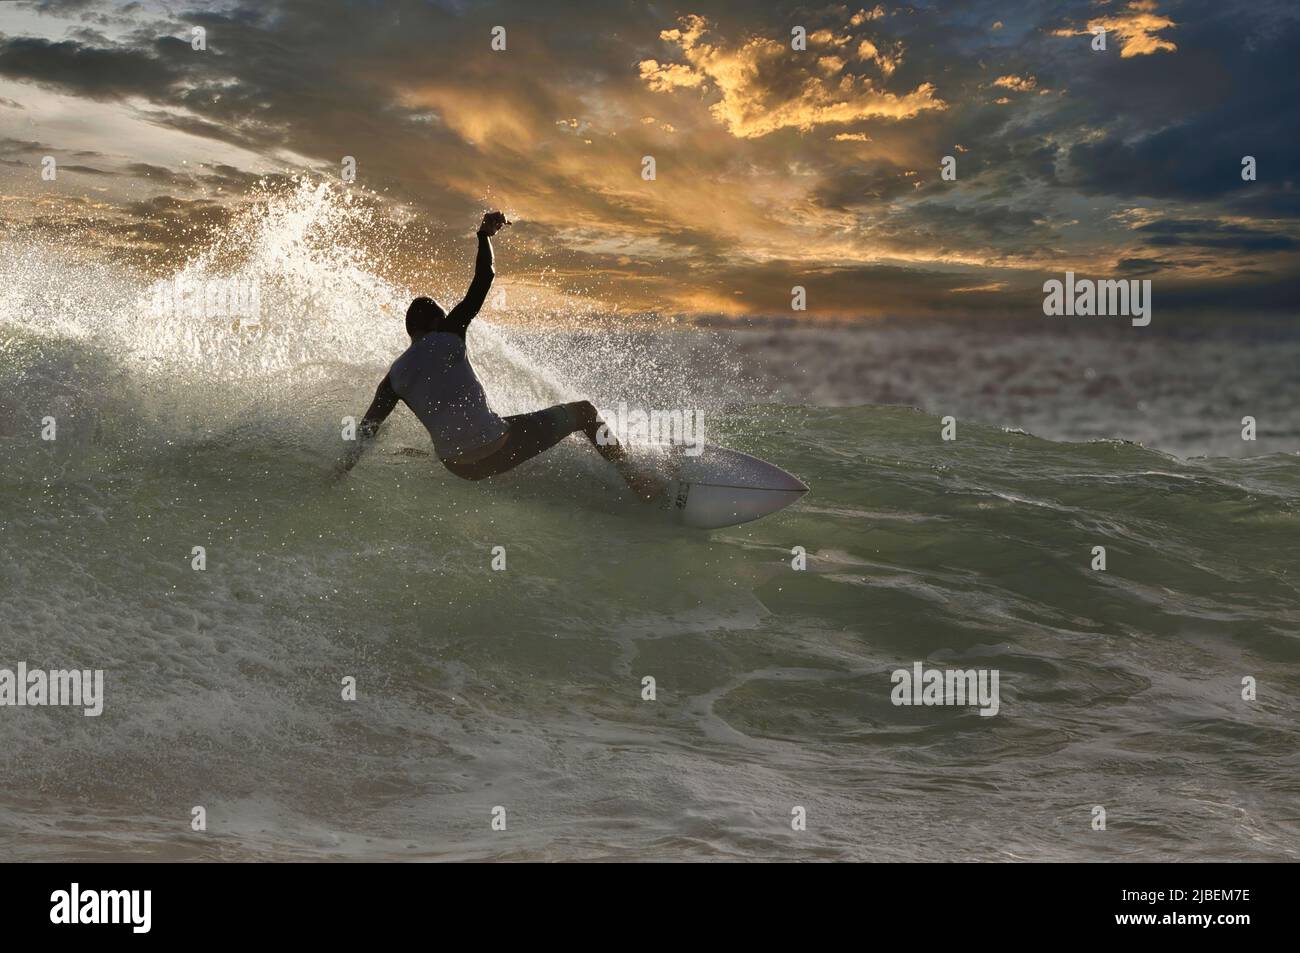 Dramtic silhouetted surfer on a high energy wave at sunset. Stock Photo